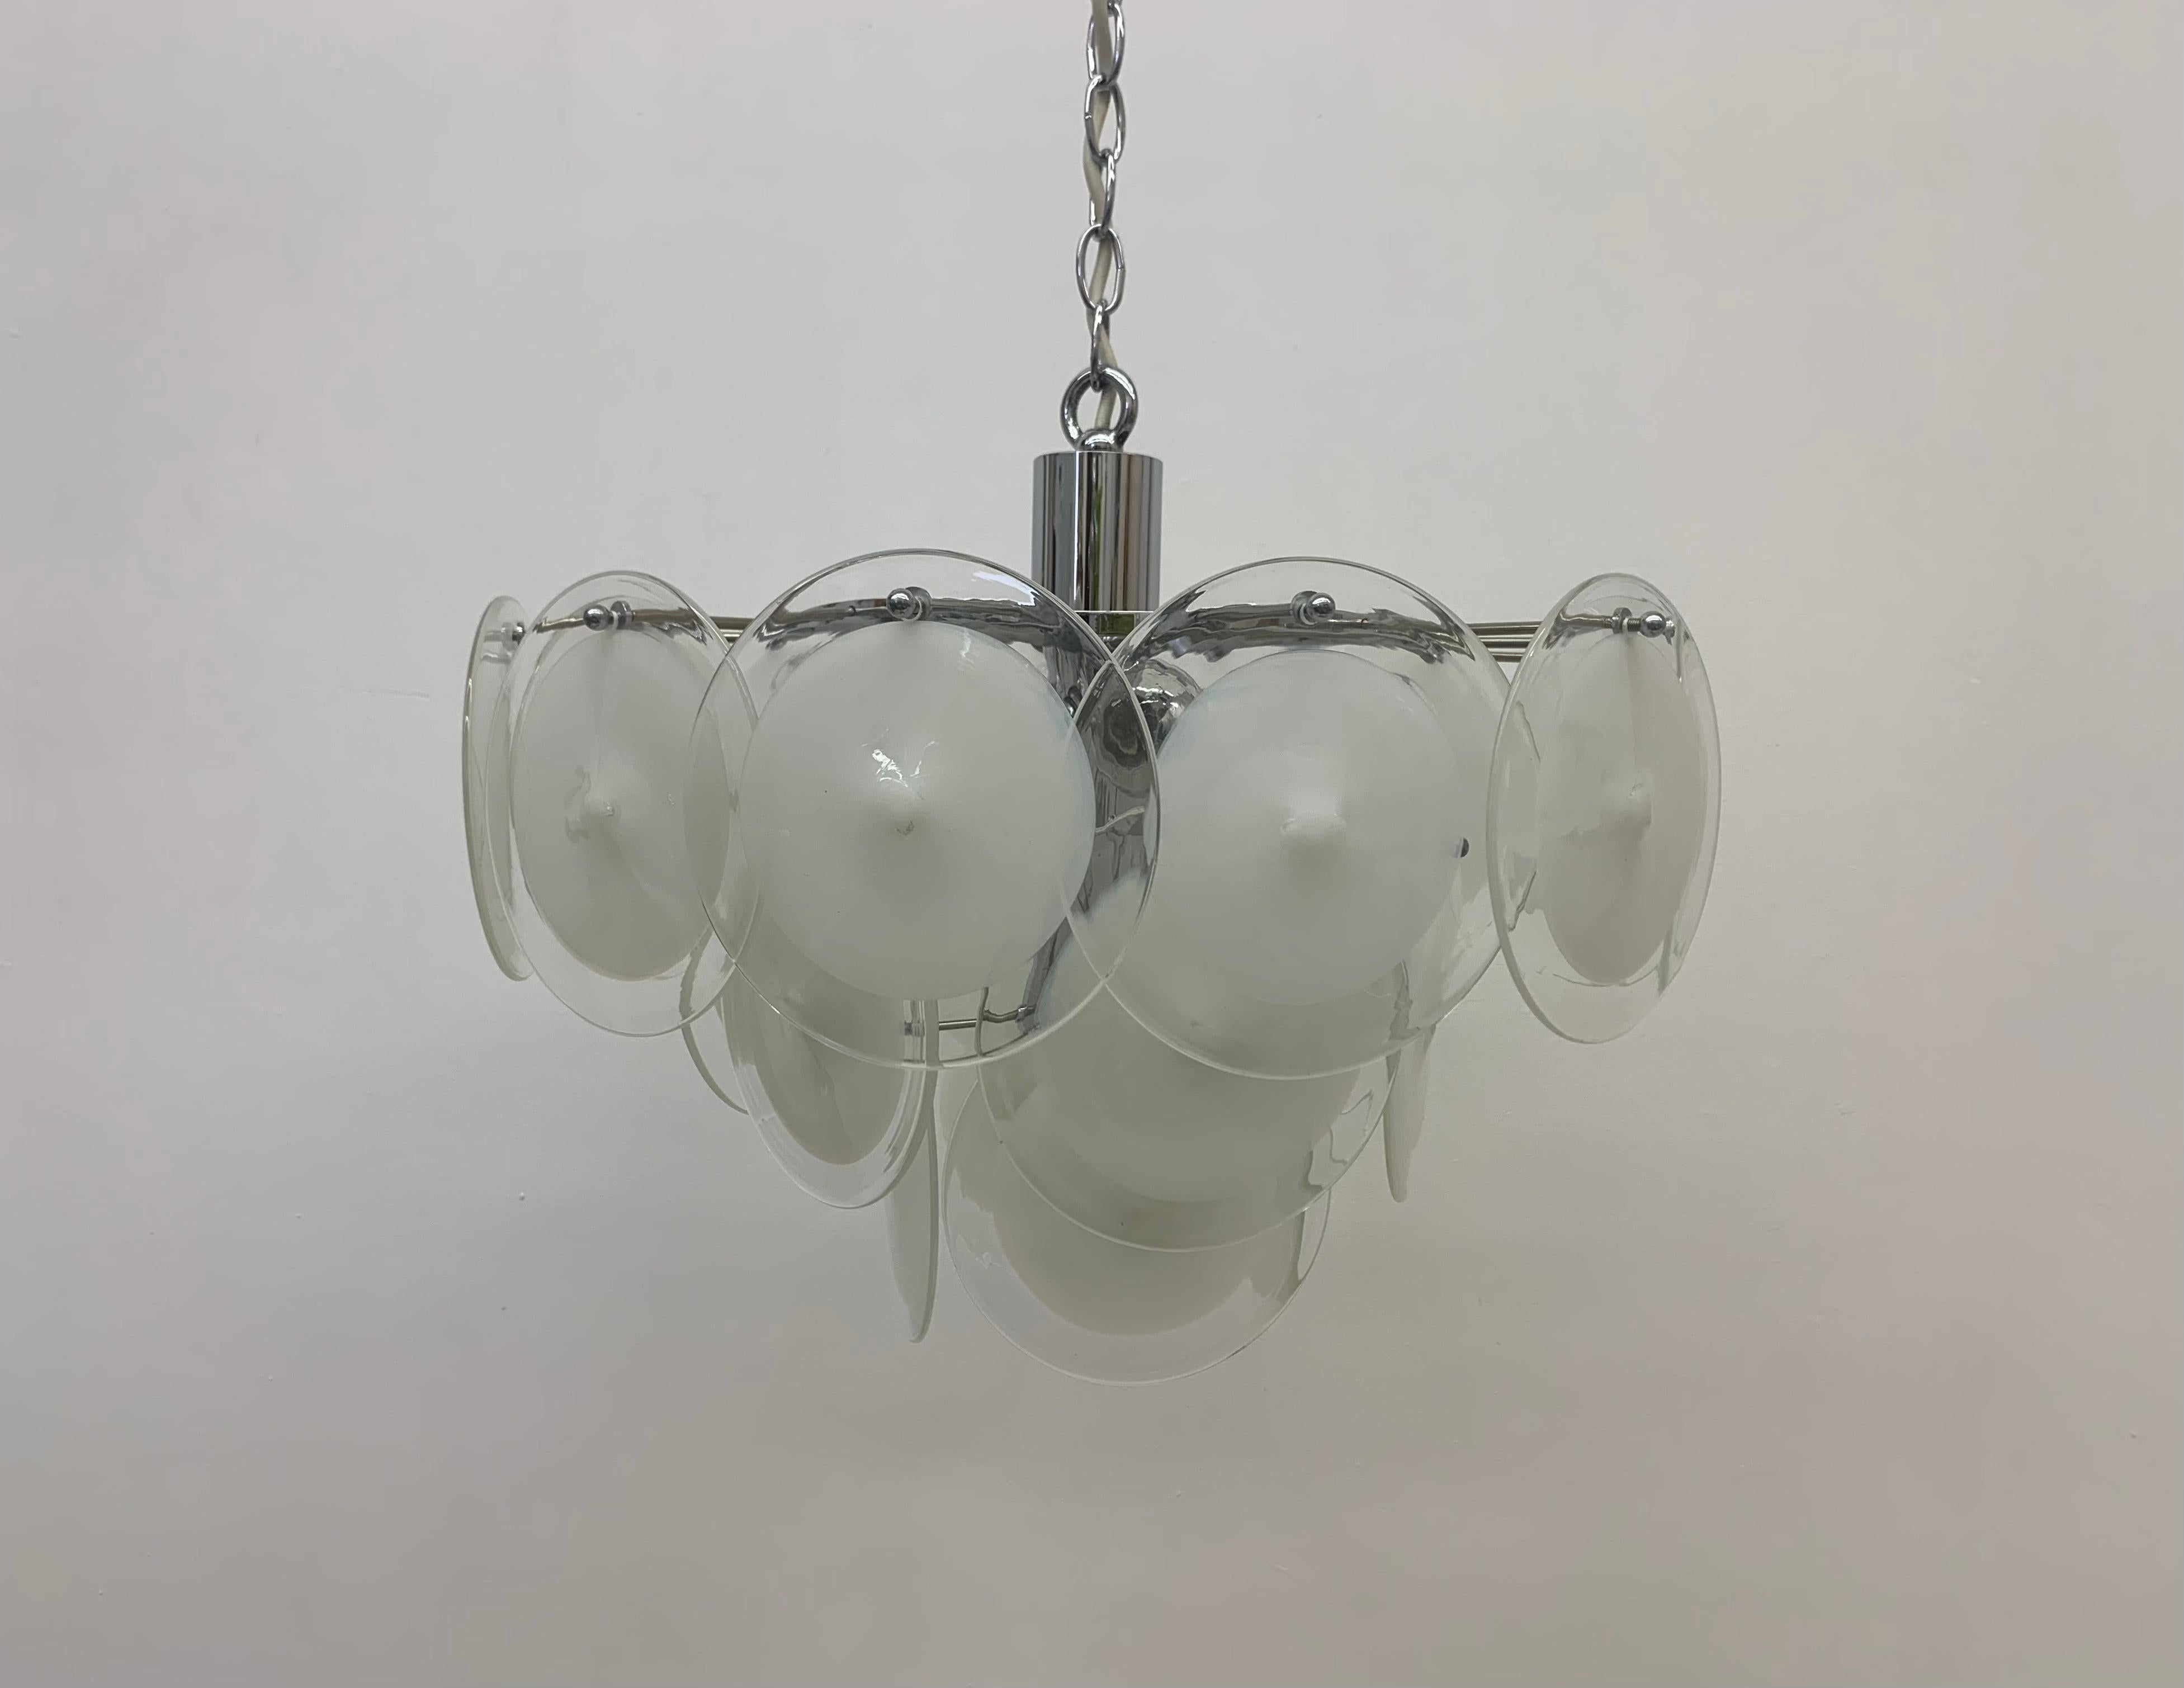 Italian Disc Chandelier by Vistosi Murano Glass, Italy, 1970s For Sale 1